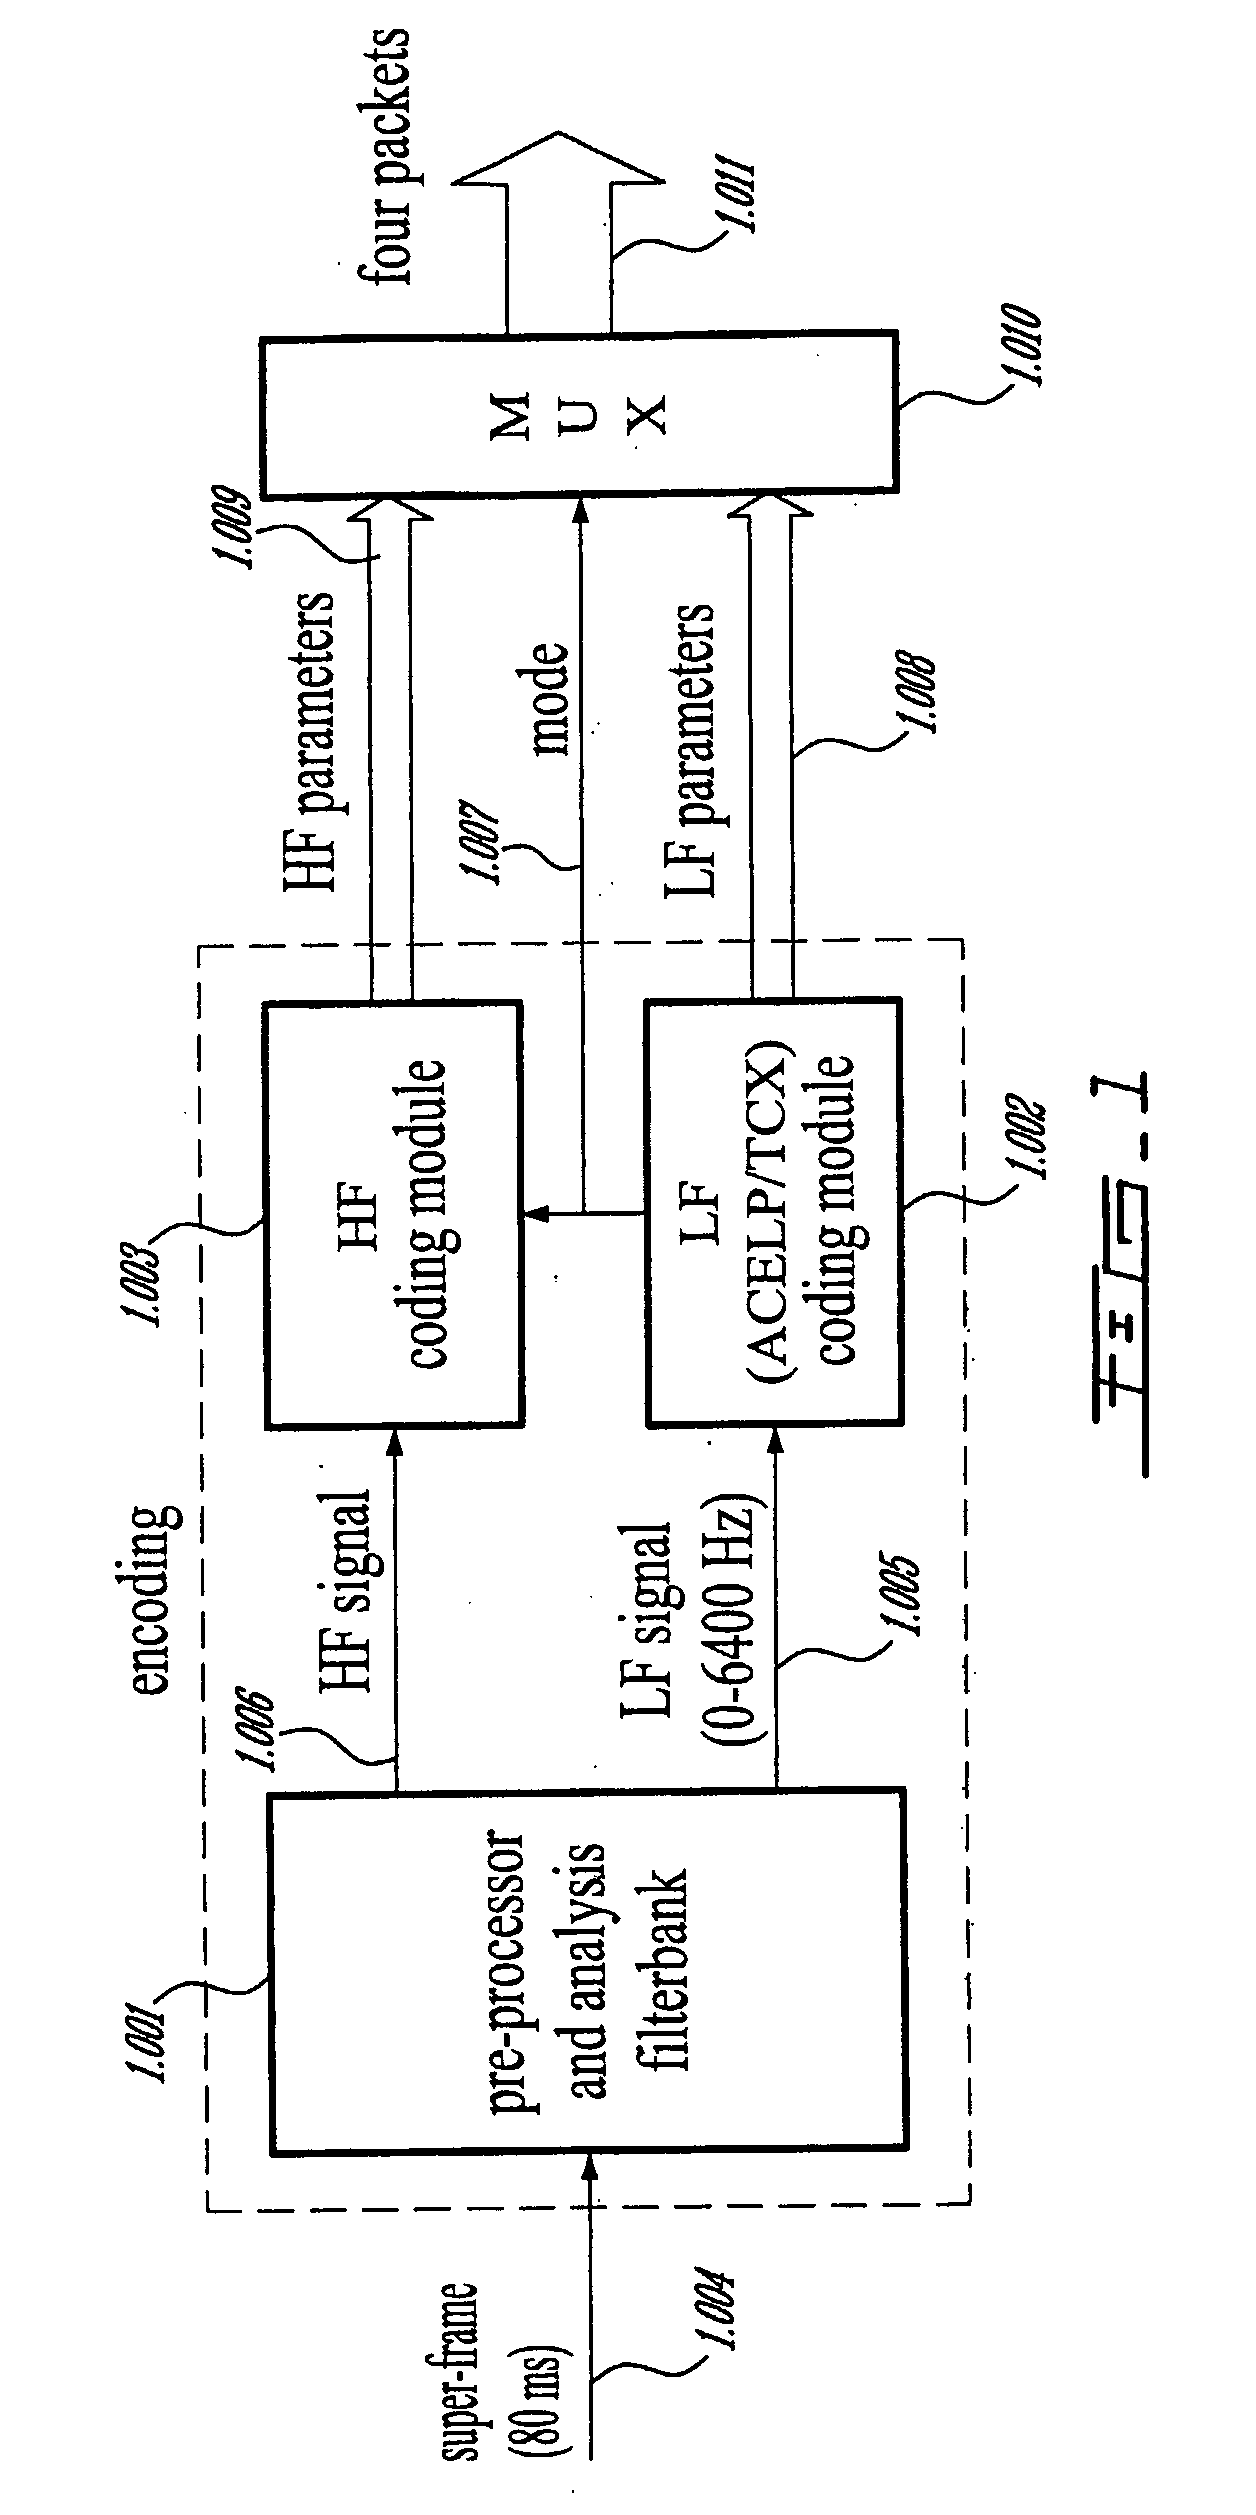 Methods and Devices for Low-Frequency Emphasis During Audio Compression Based on Acelp/Tcx